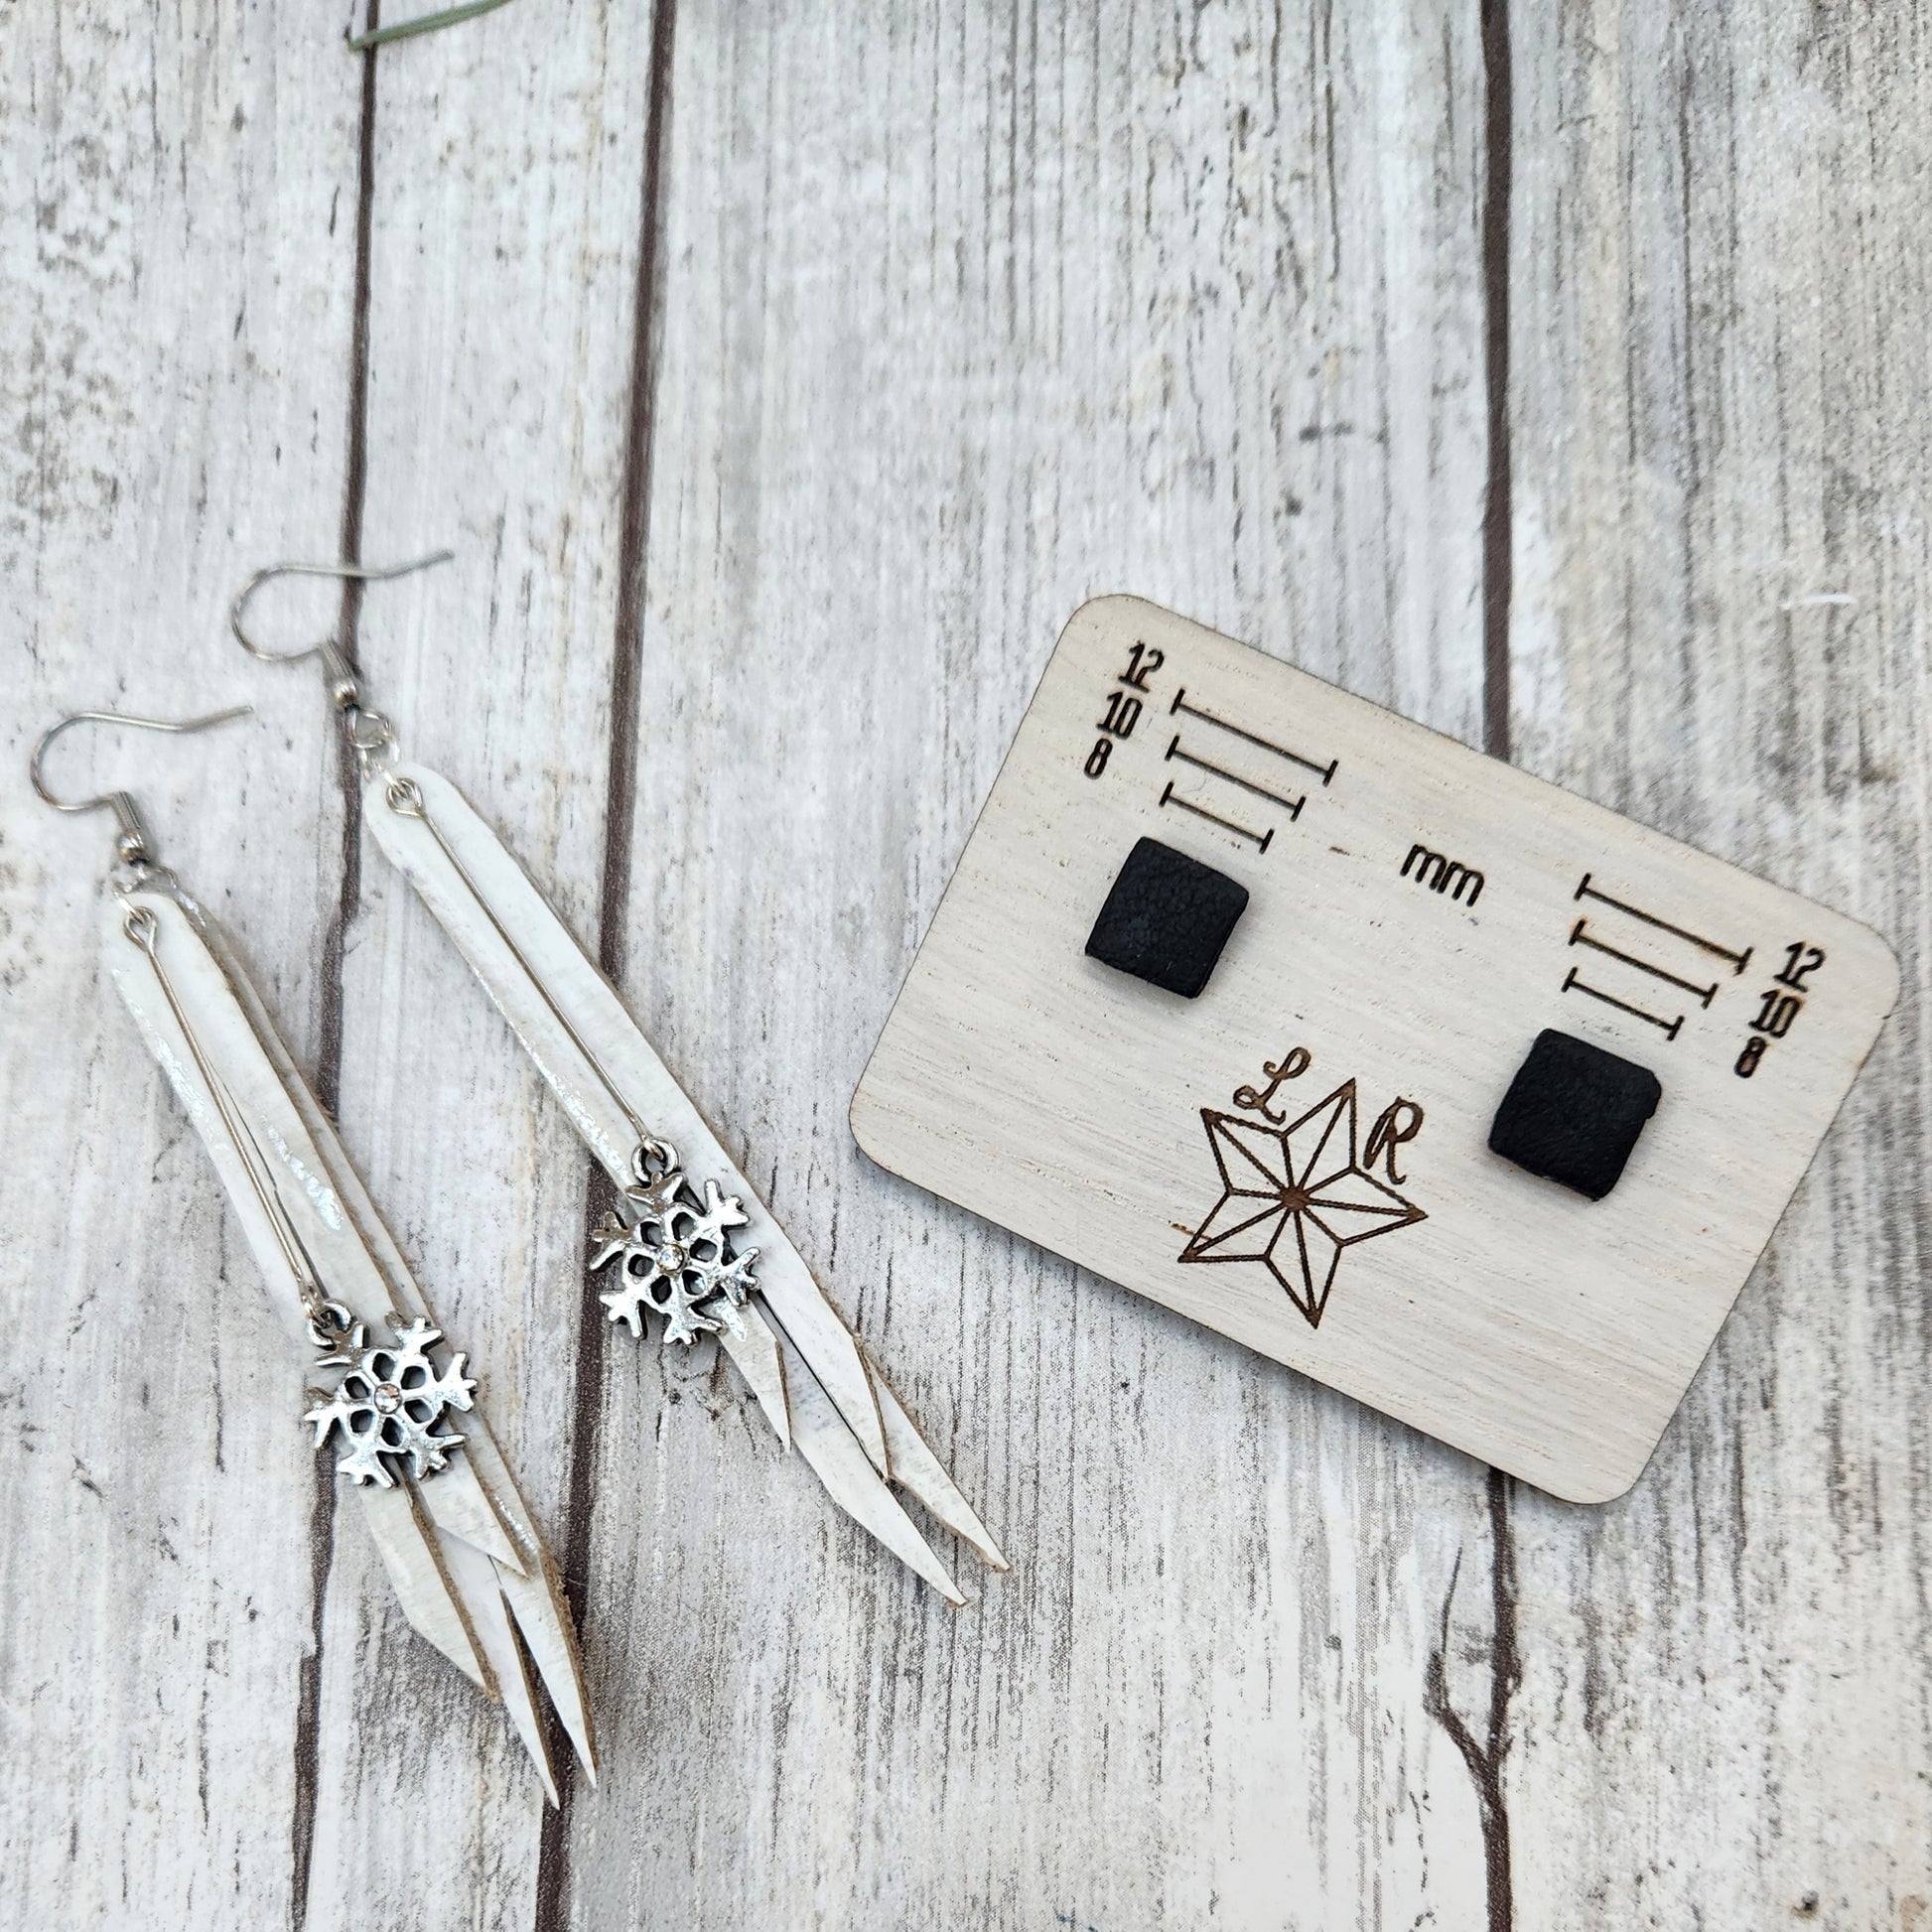 Winter earrings, Icicle has white leather with metallic silver highlights cut into angles fringe with a snowflake charm in front. With matte black Lil studs in square.